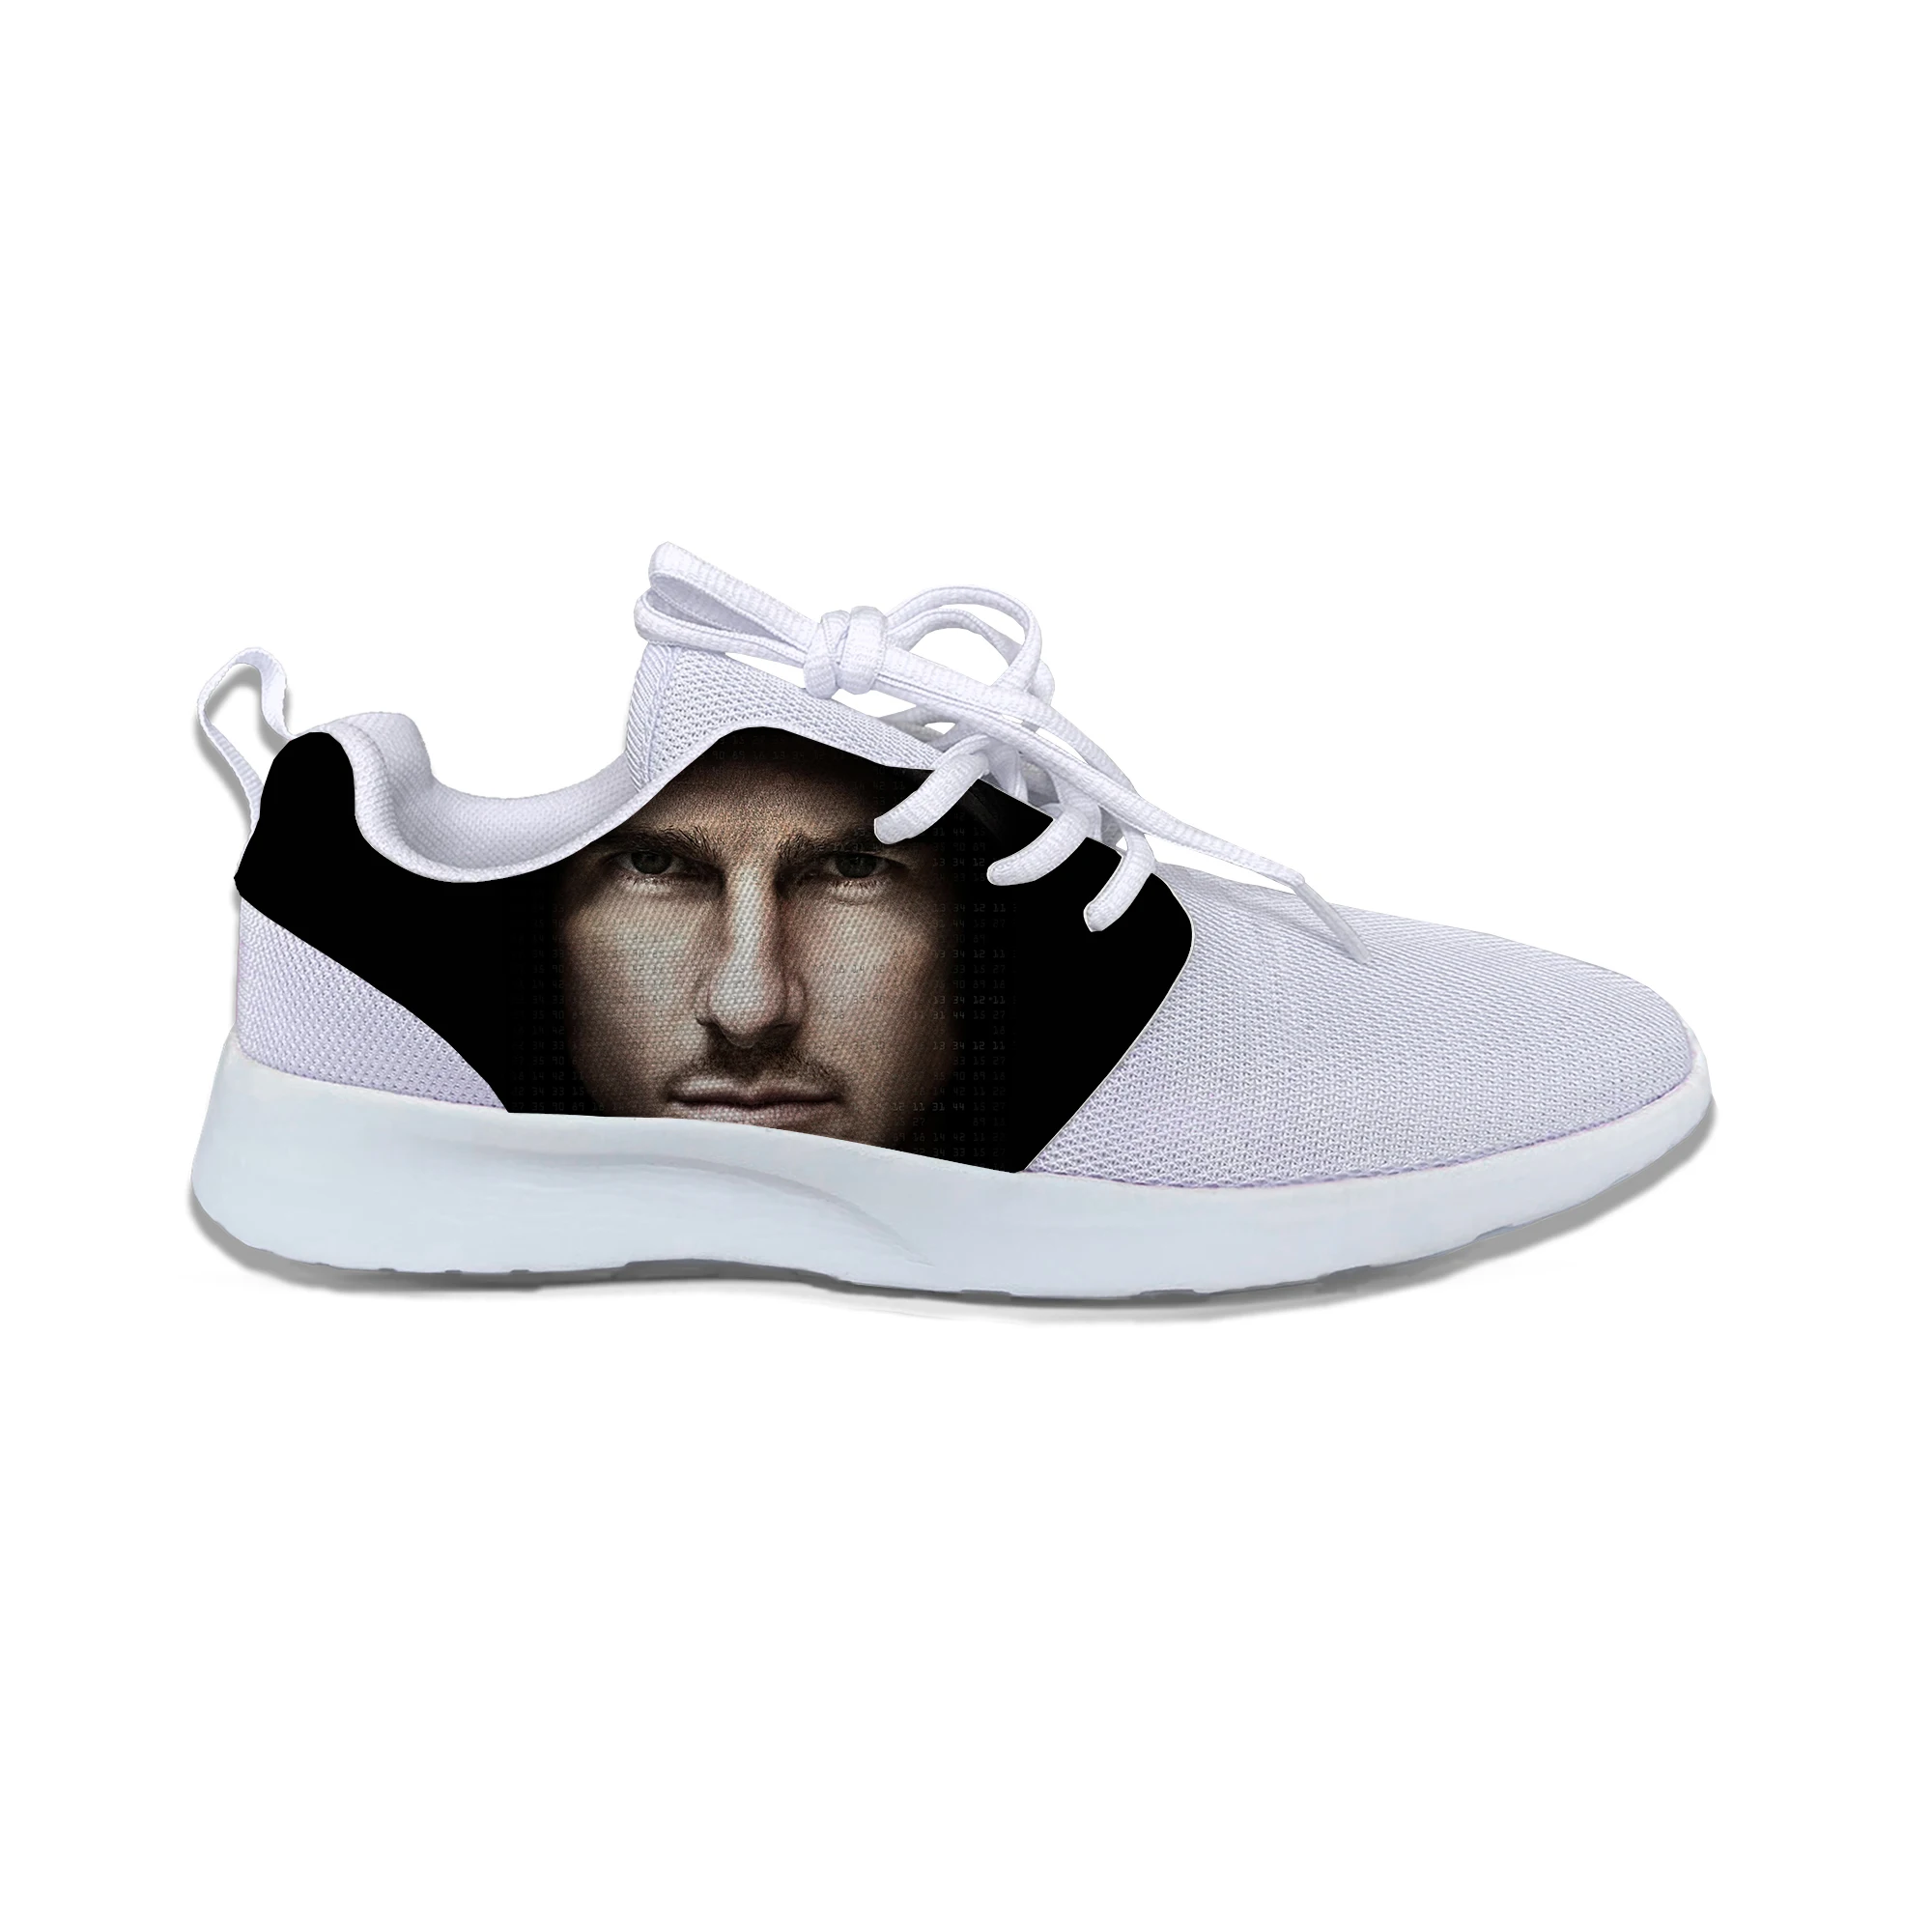 

Hot Summer New Men Women Celebrity Tom Cruise Shoes Lightweight Breathable Cool Mesh Running Shoes Fashion Classic Sports Shoes